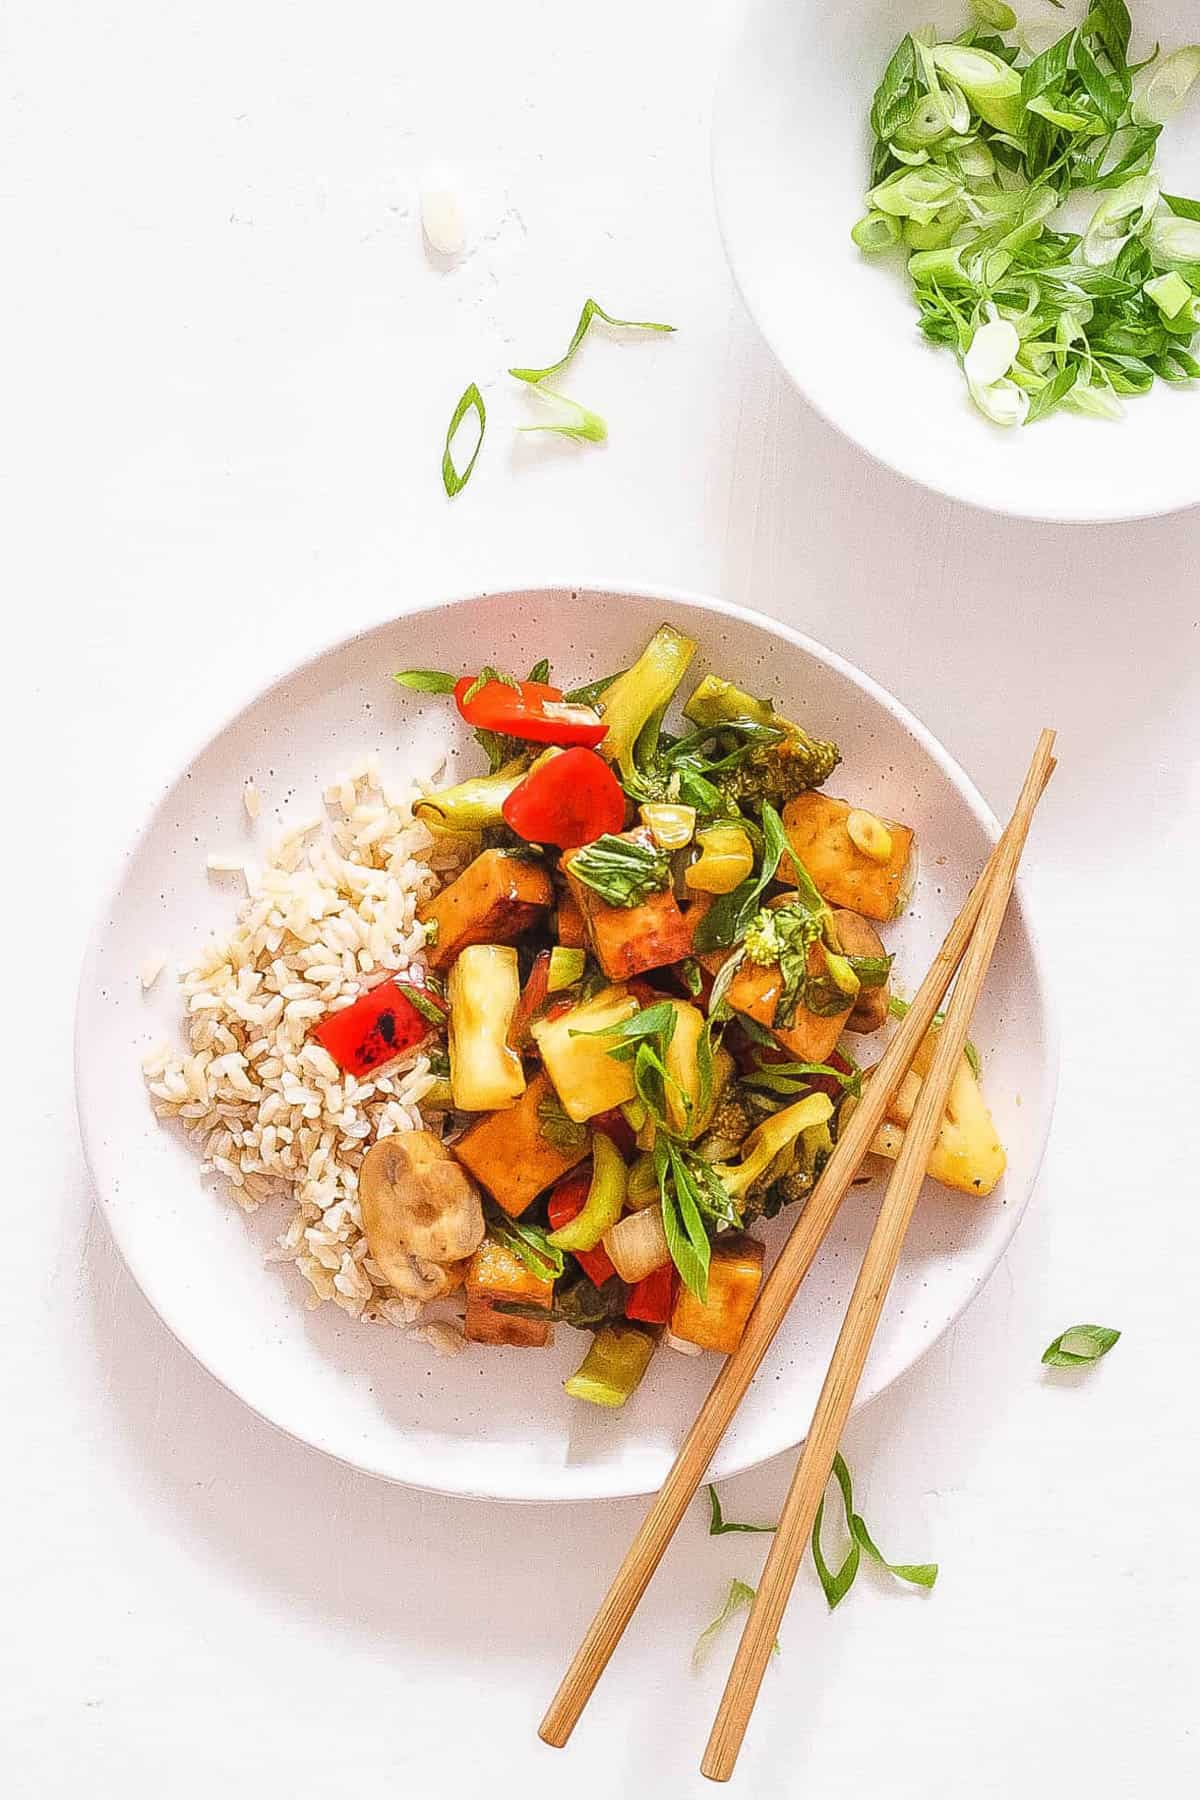 Vegan sweet and sour tofu, served on a white plate with chopsticks.